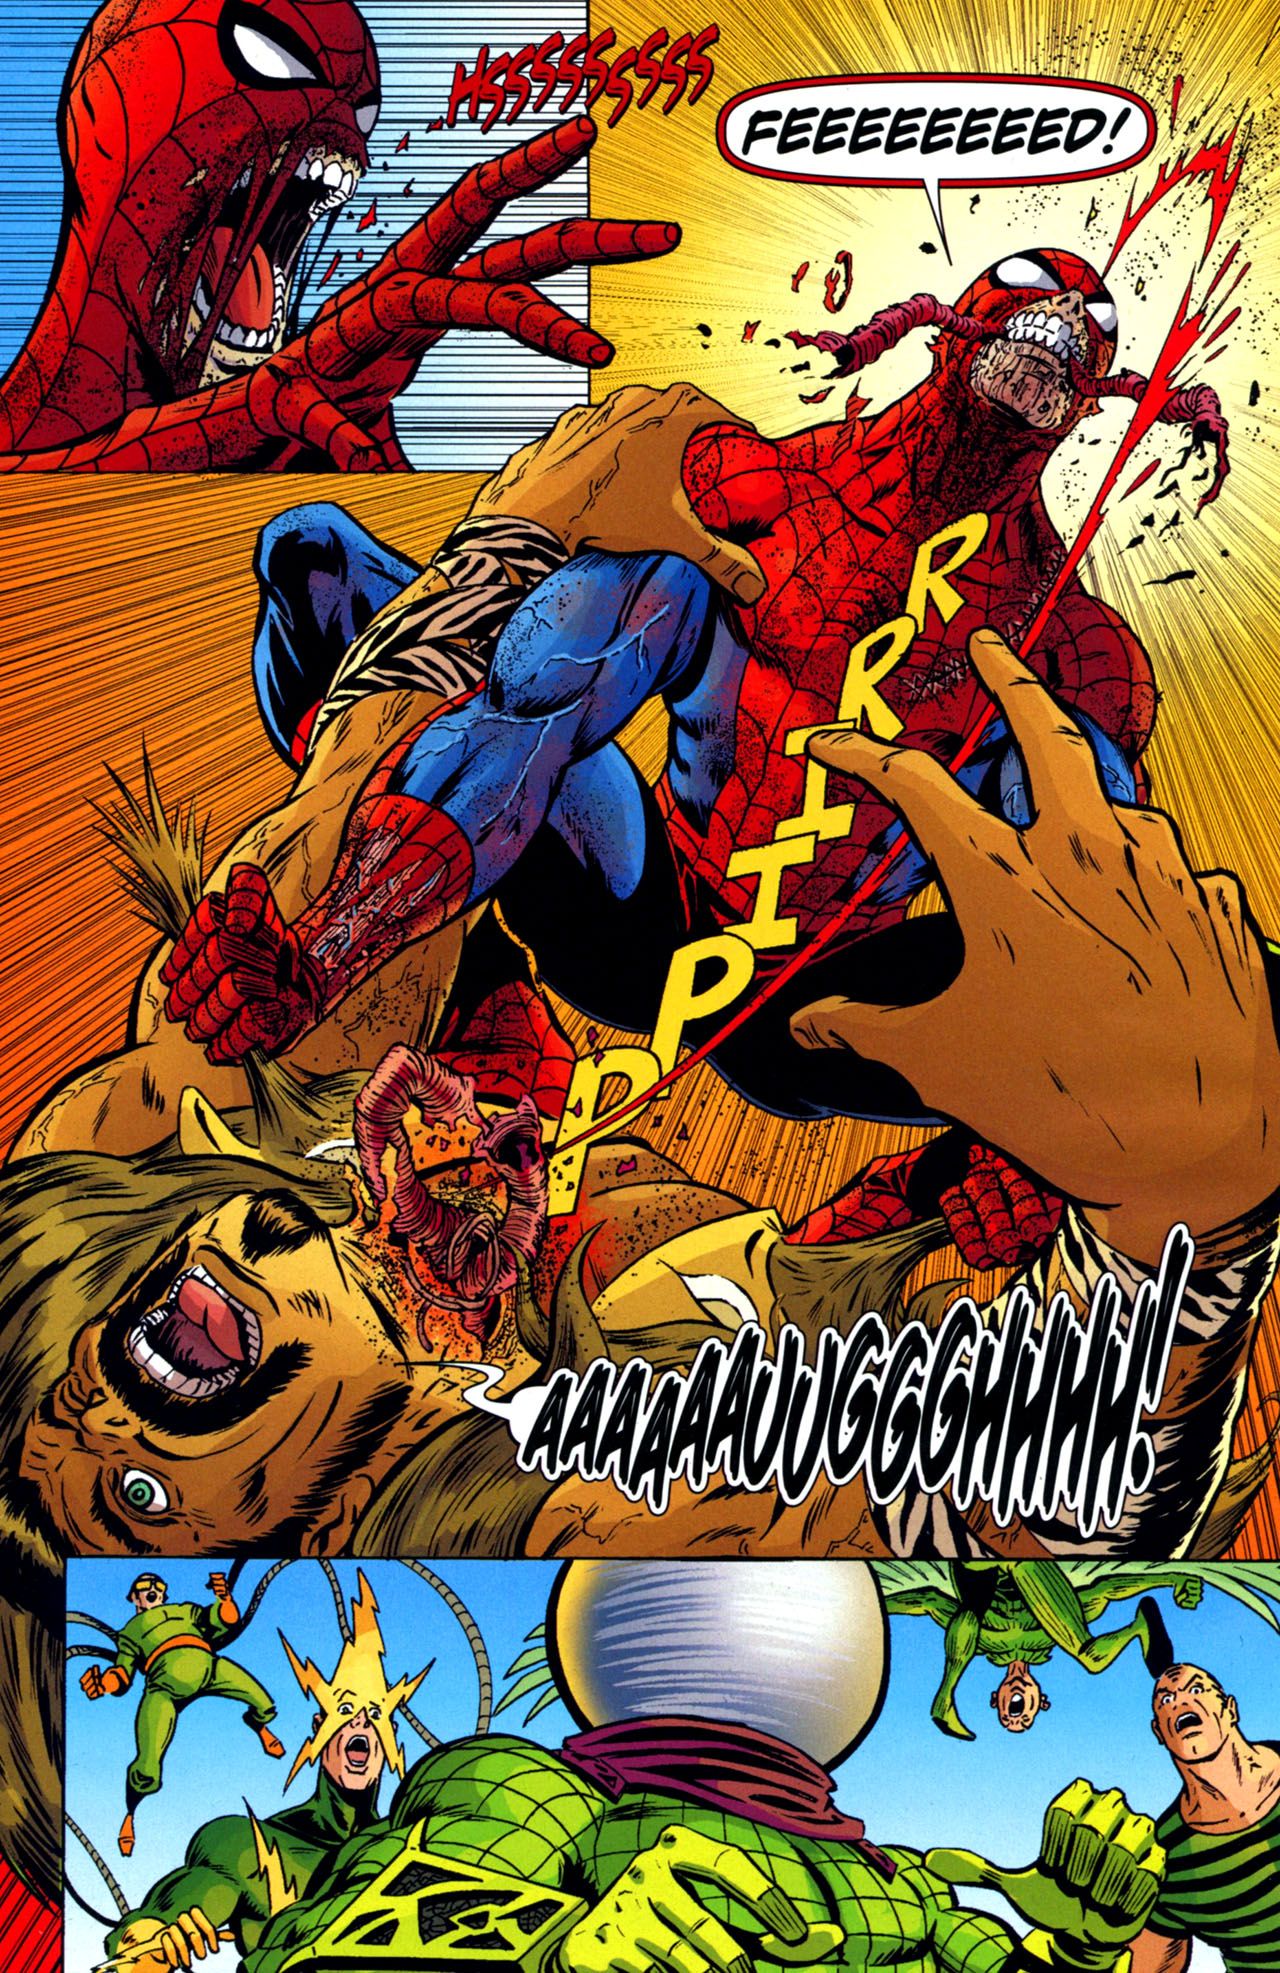 Marvel Zombies - The Return 01 of 05